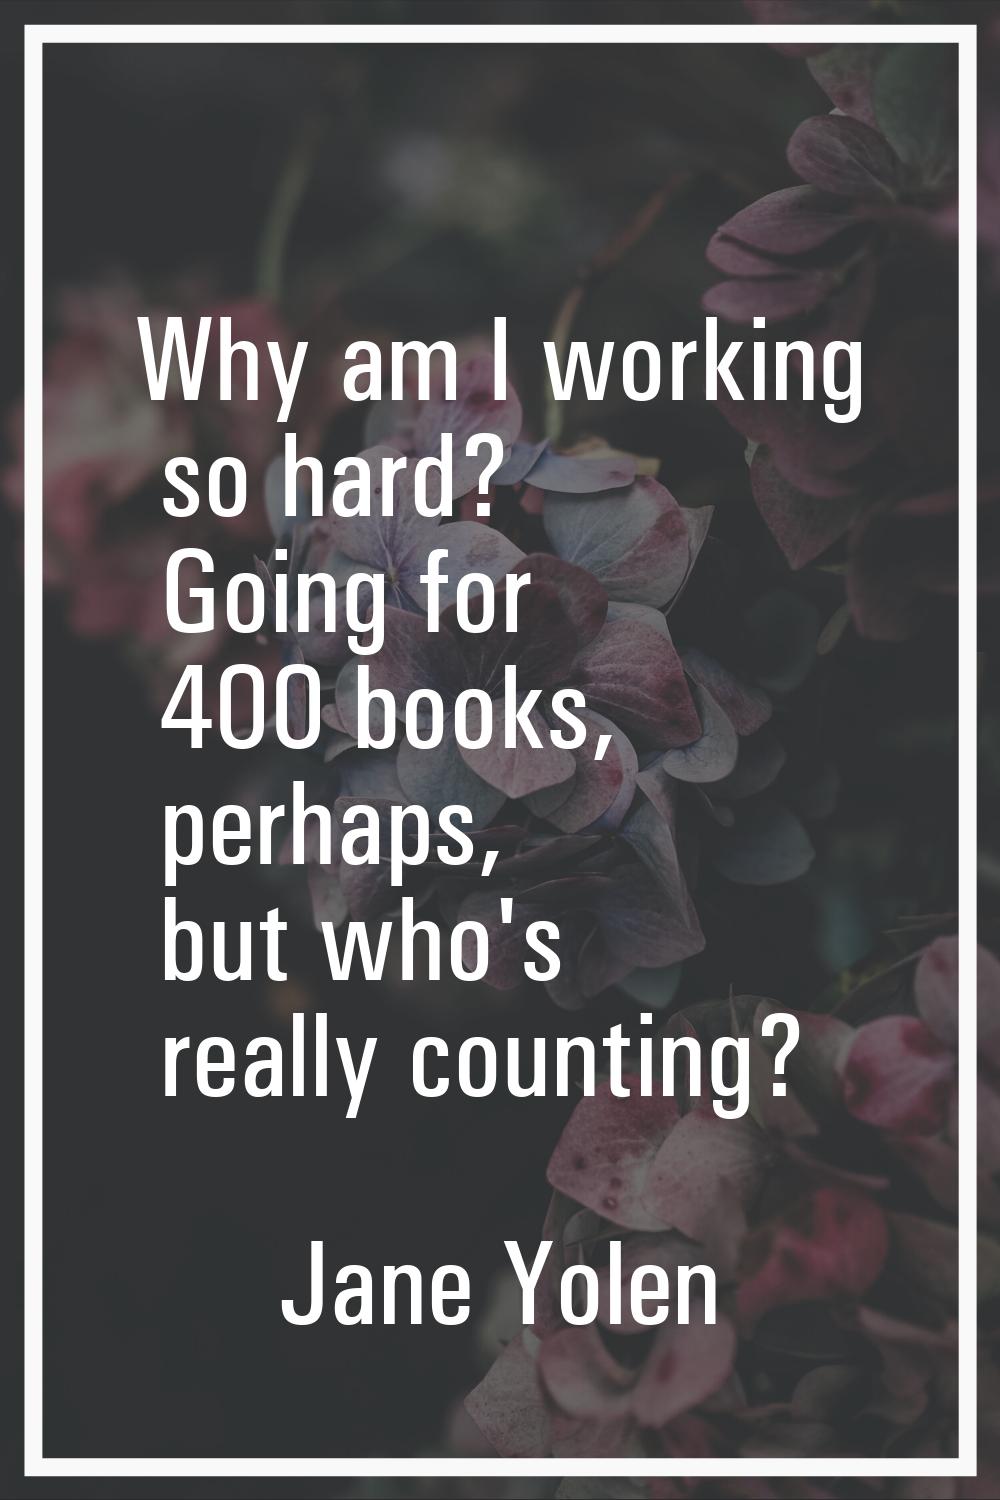 Why am I working so hard? Going for 400 books, perhaps, but who's really counting?